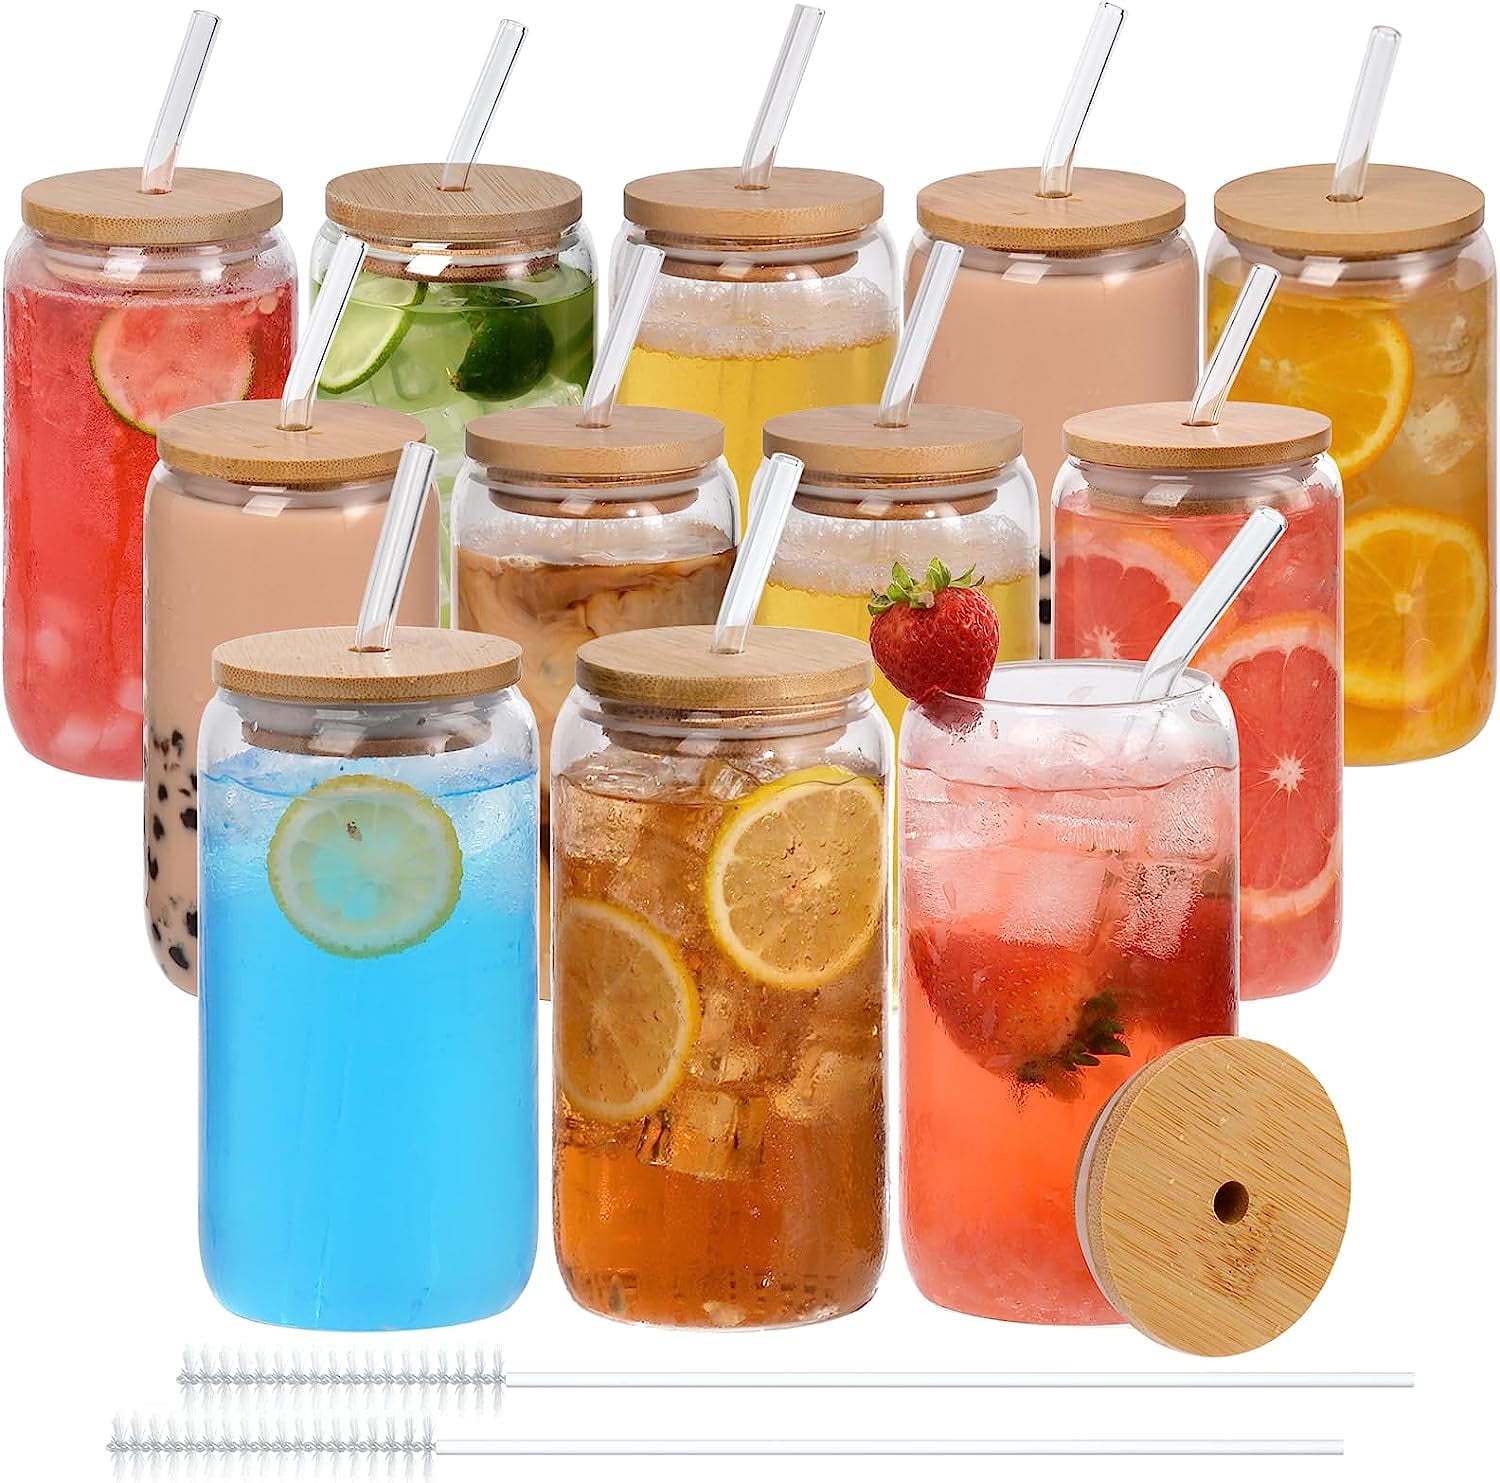 Gijjgole Drinking Glasses with Bamboo Lids and Glass Straw 12pcs Set - Can  Shaped Glass Cups, Beer Glasses, Iced Coffee Glasses, Cute Tumbler Cup,  Ideal for Cocktail, Whiskey, Gift -2 Cleaning Brushes 